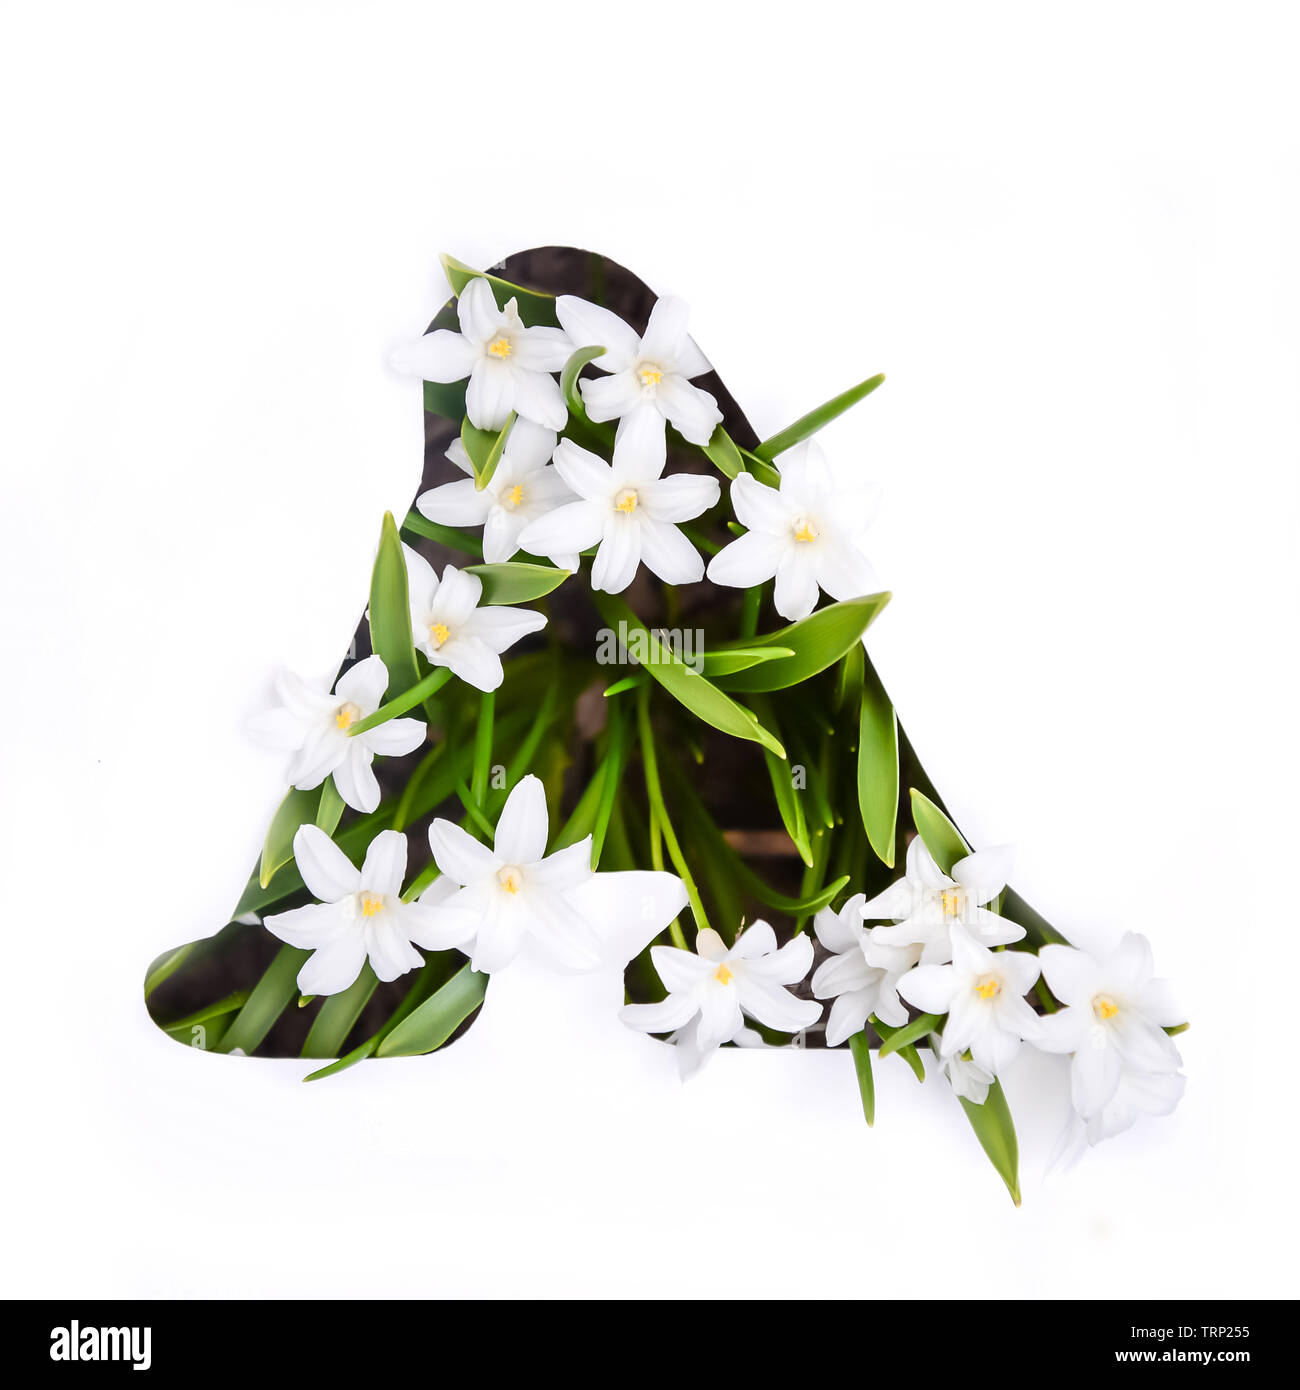 The letter A of the English alphabet of small white chionodoxa flowers Stock Photo